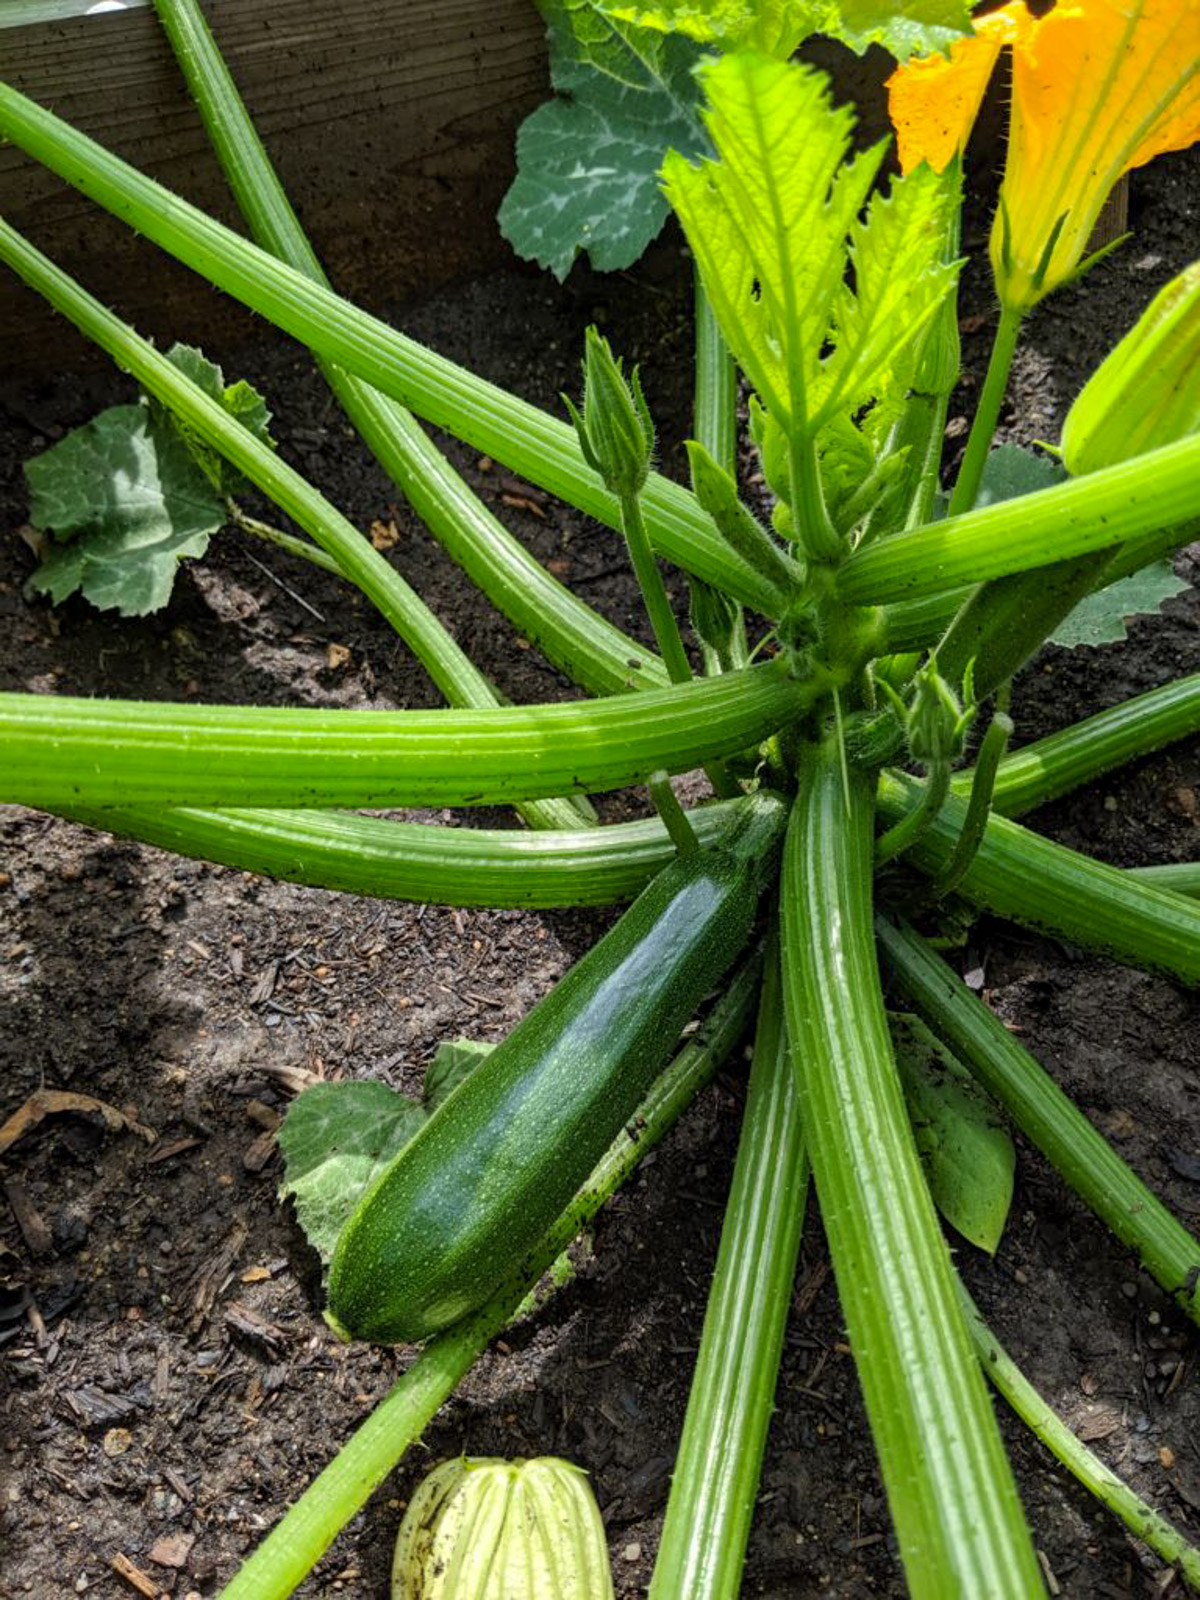 Close up shot of garden zucchini growing on the plant.